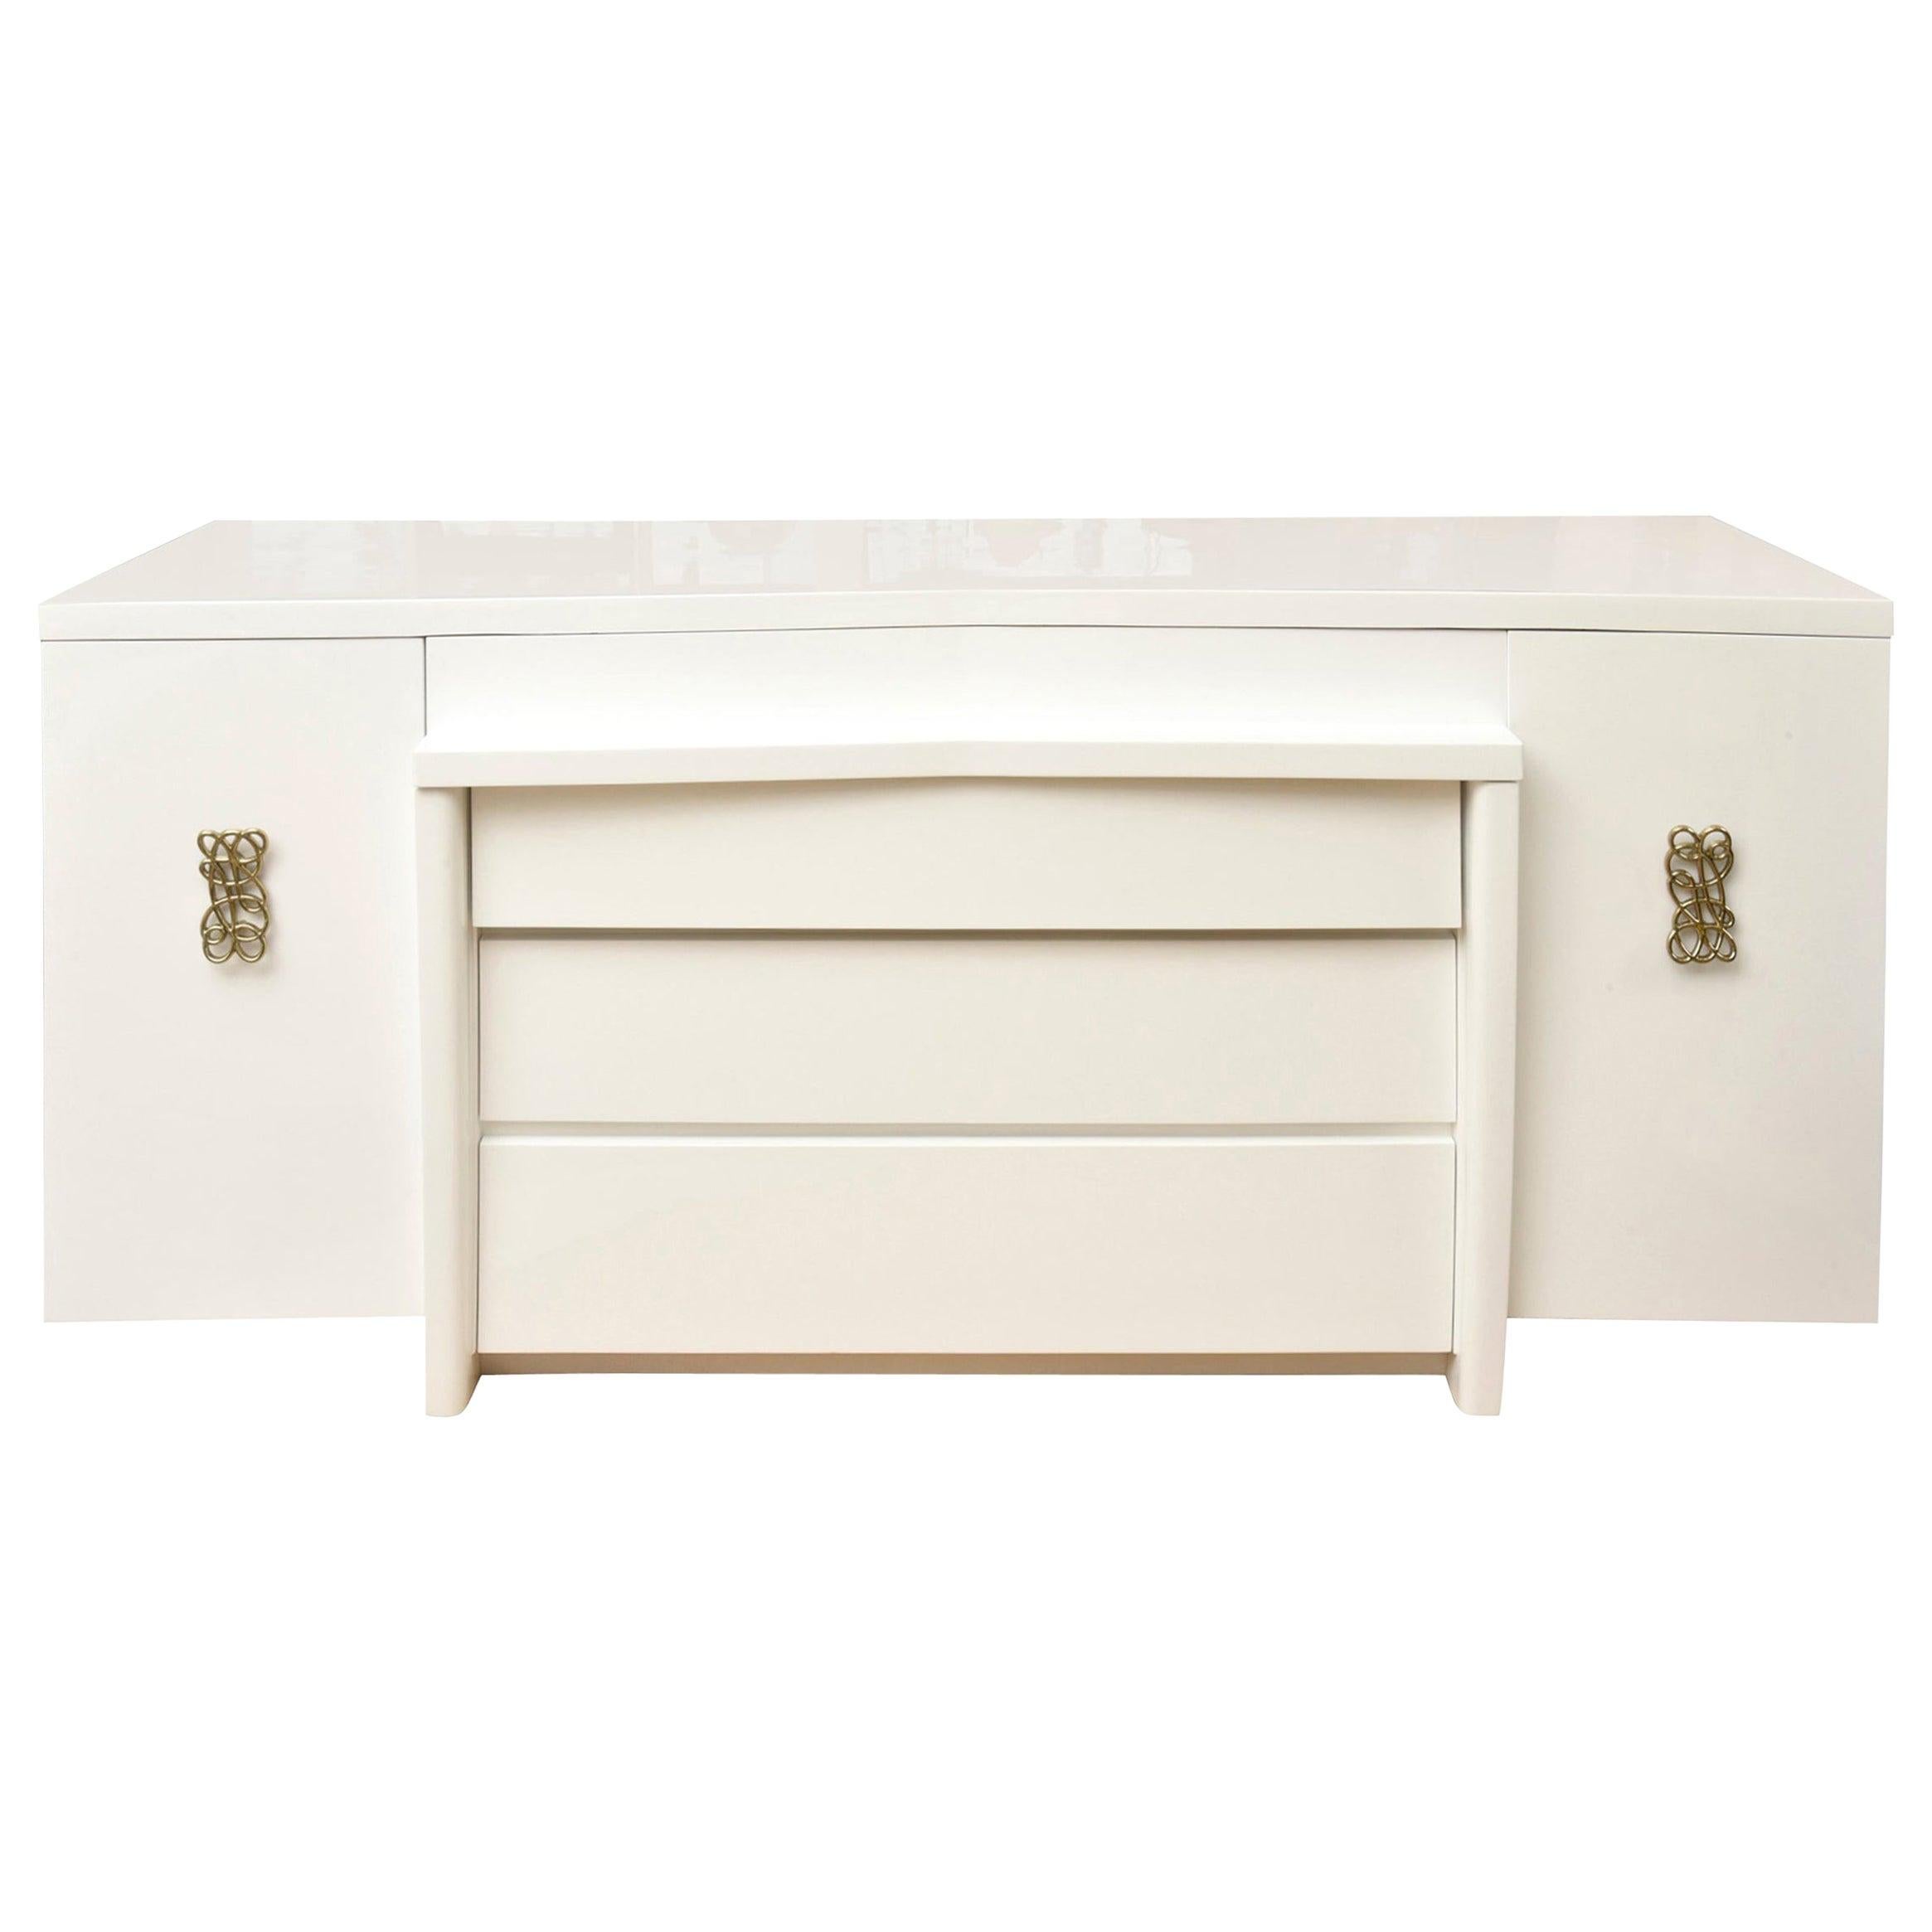 Modernage White Lacquered Wood and Brass Buffet or Cabinet Vintage